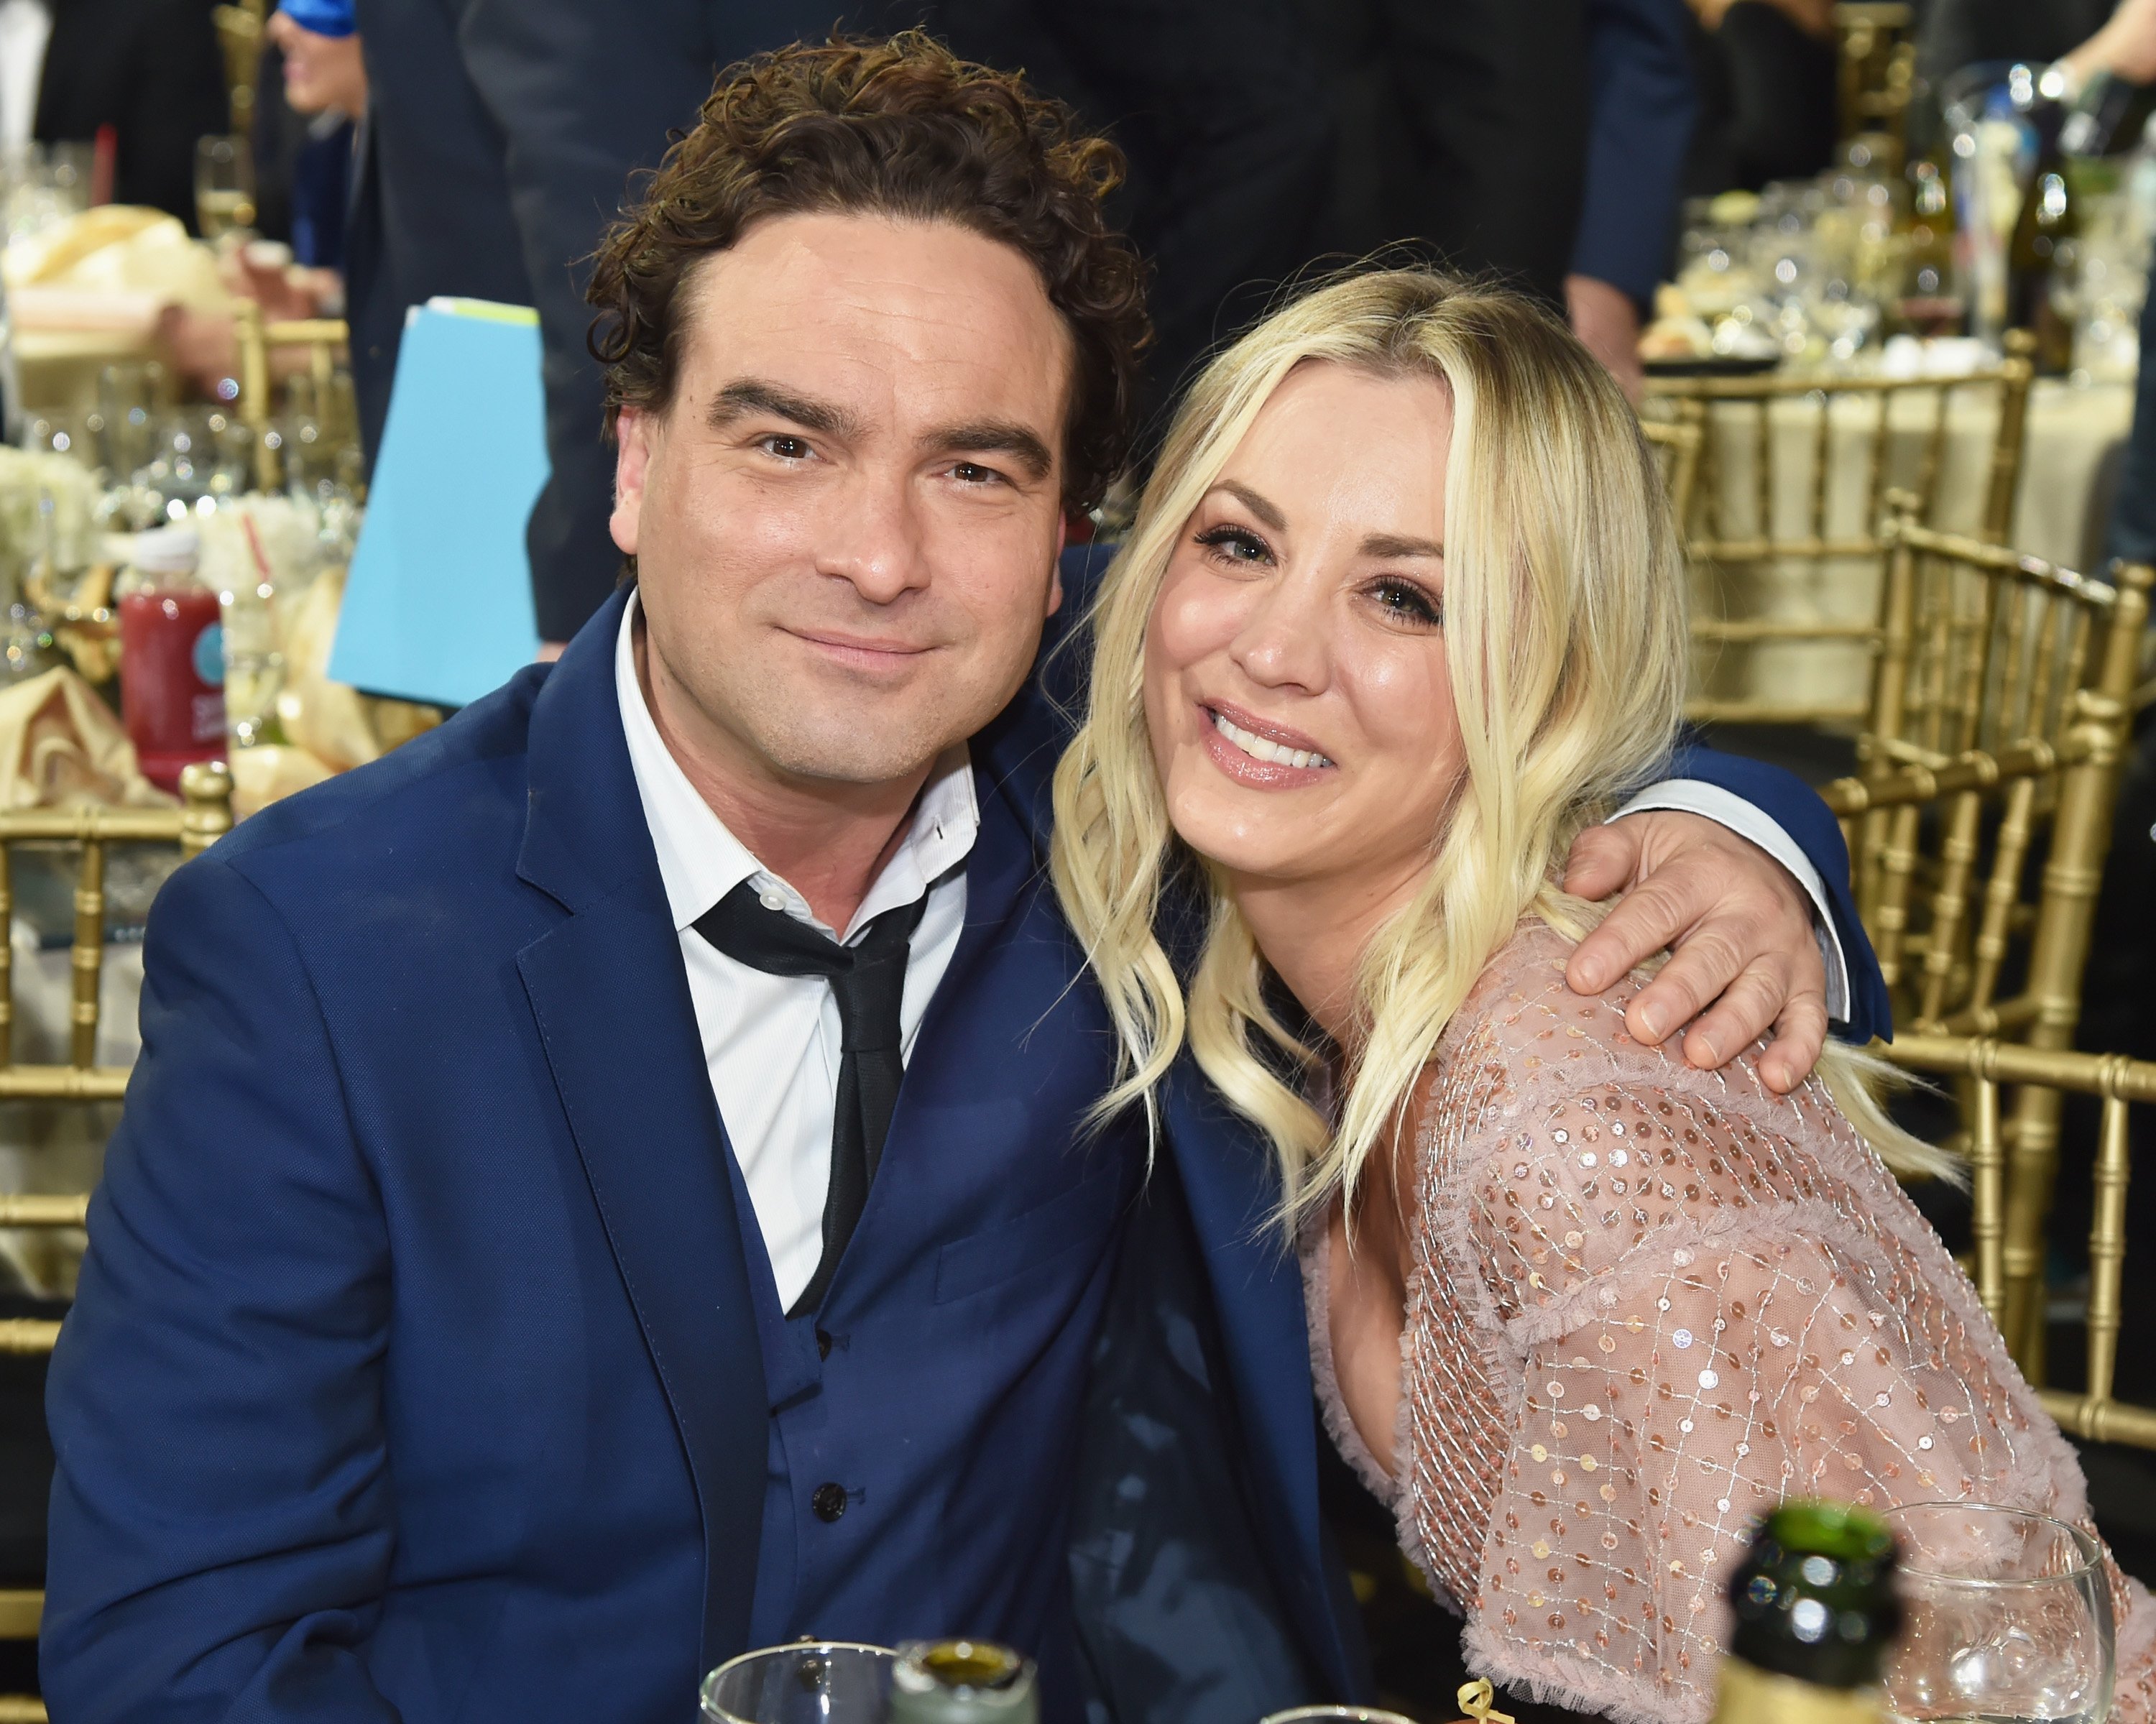 Johnny Galecki and Kaley Cuoco attend The 23rd Annual Critics' Choice Awards at Barker Hangar on January 11, 2018